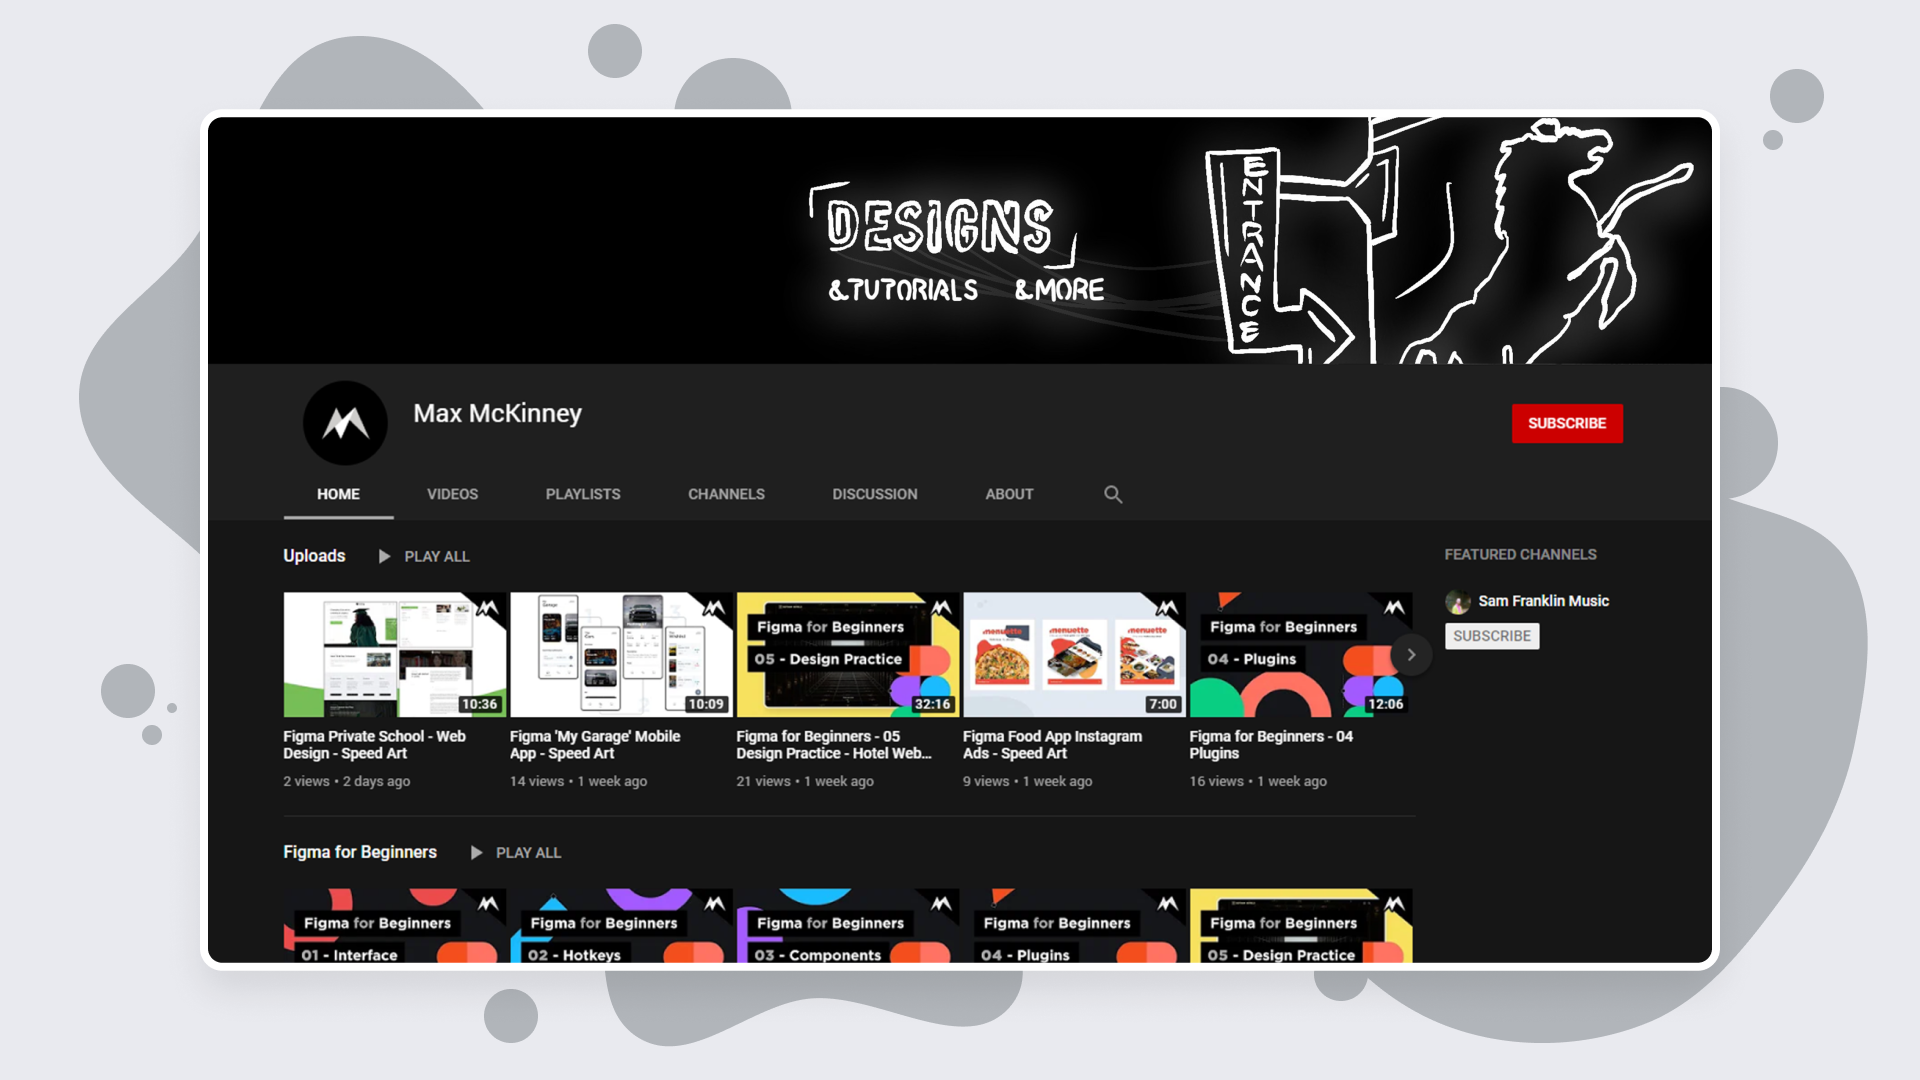 Shown is a preview of the YouTube landing page for Max McKinney